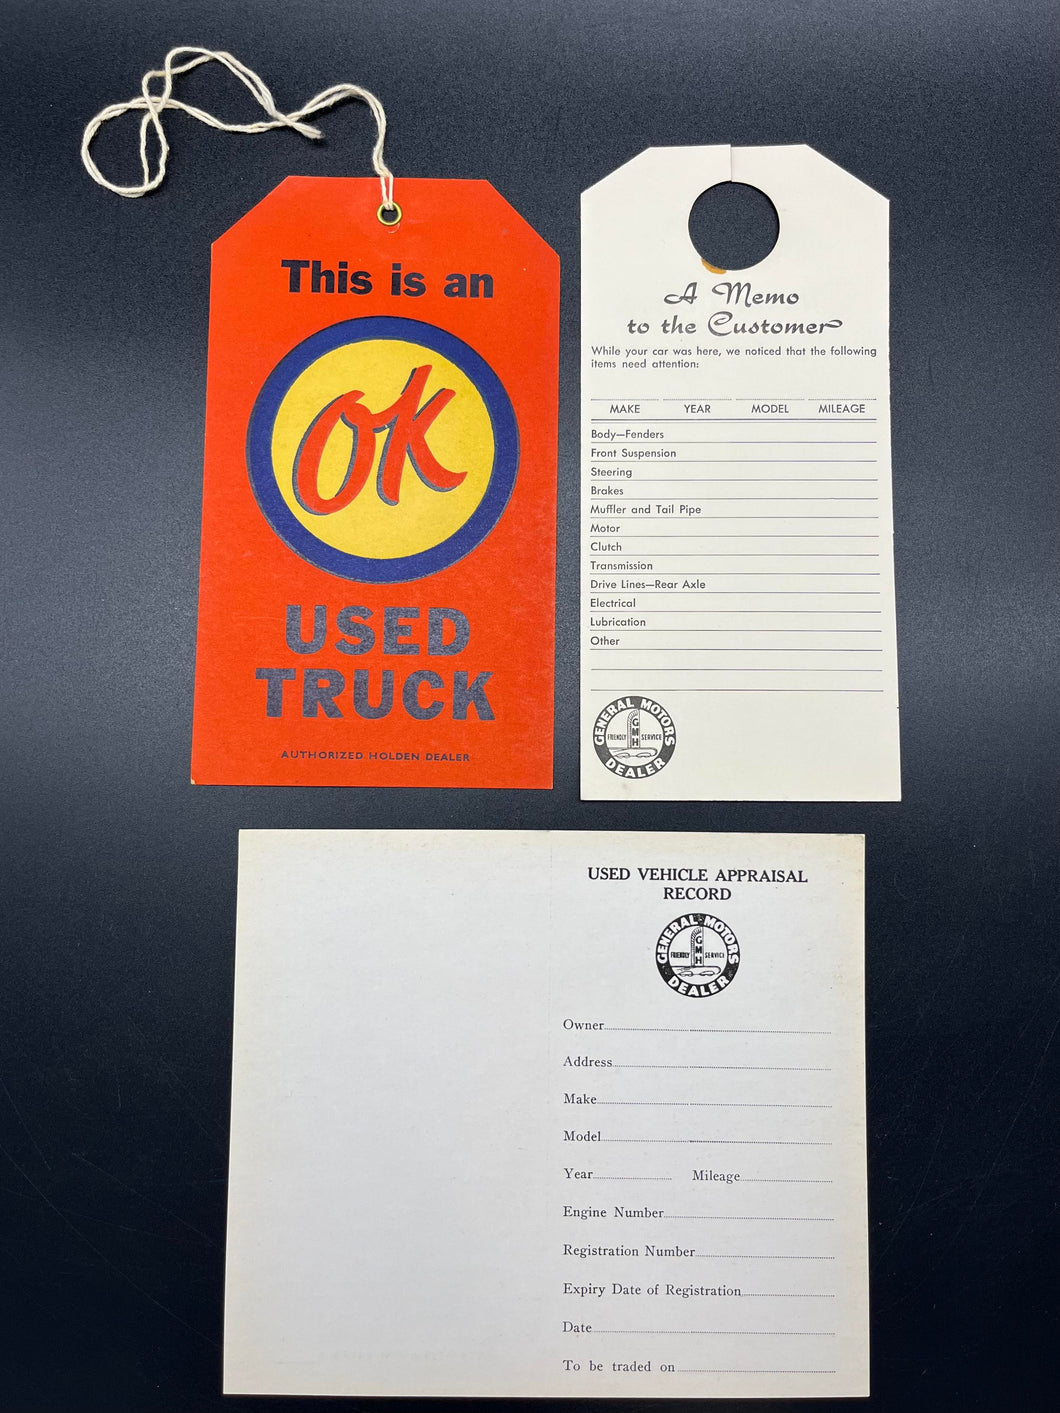 Holden Dealer OK Used Truck Tag and GMH Used Vehicle Record & Memo